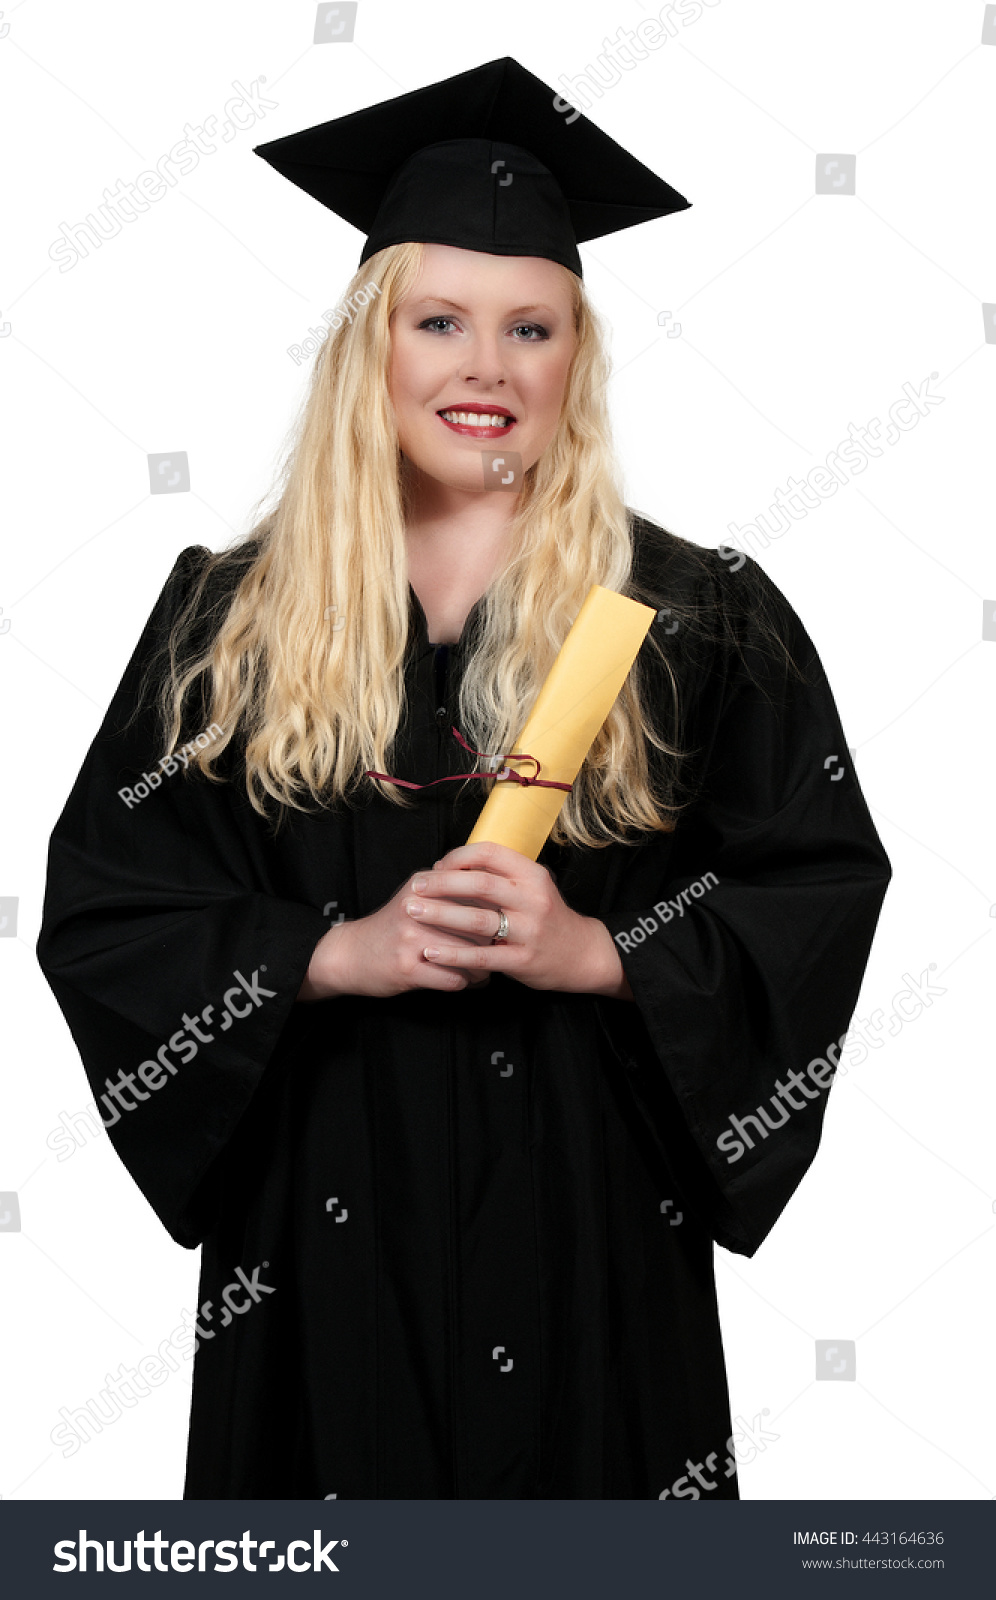 Smart Woman In Her College Graduation Gown Or Robe Stock Photo ...